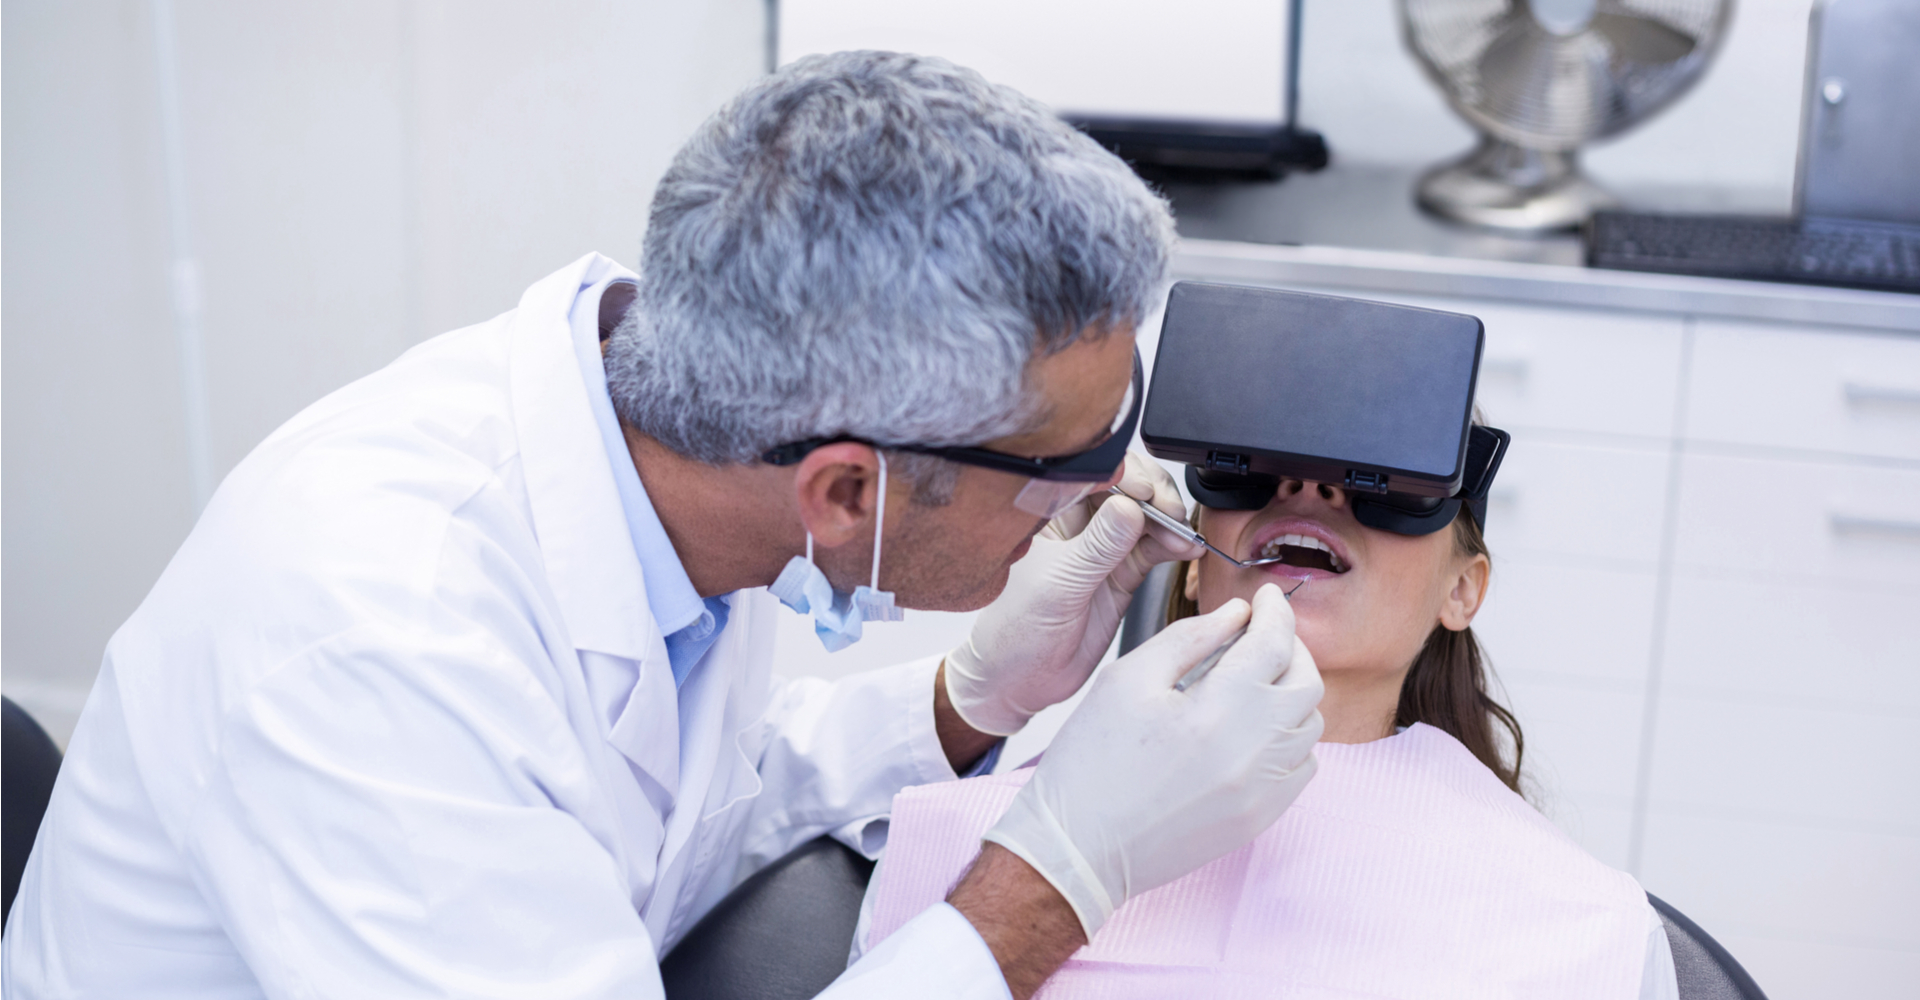 What’s Ahead For Dentistry In 2022 And Beyond